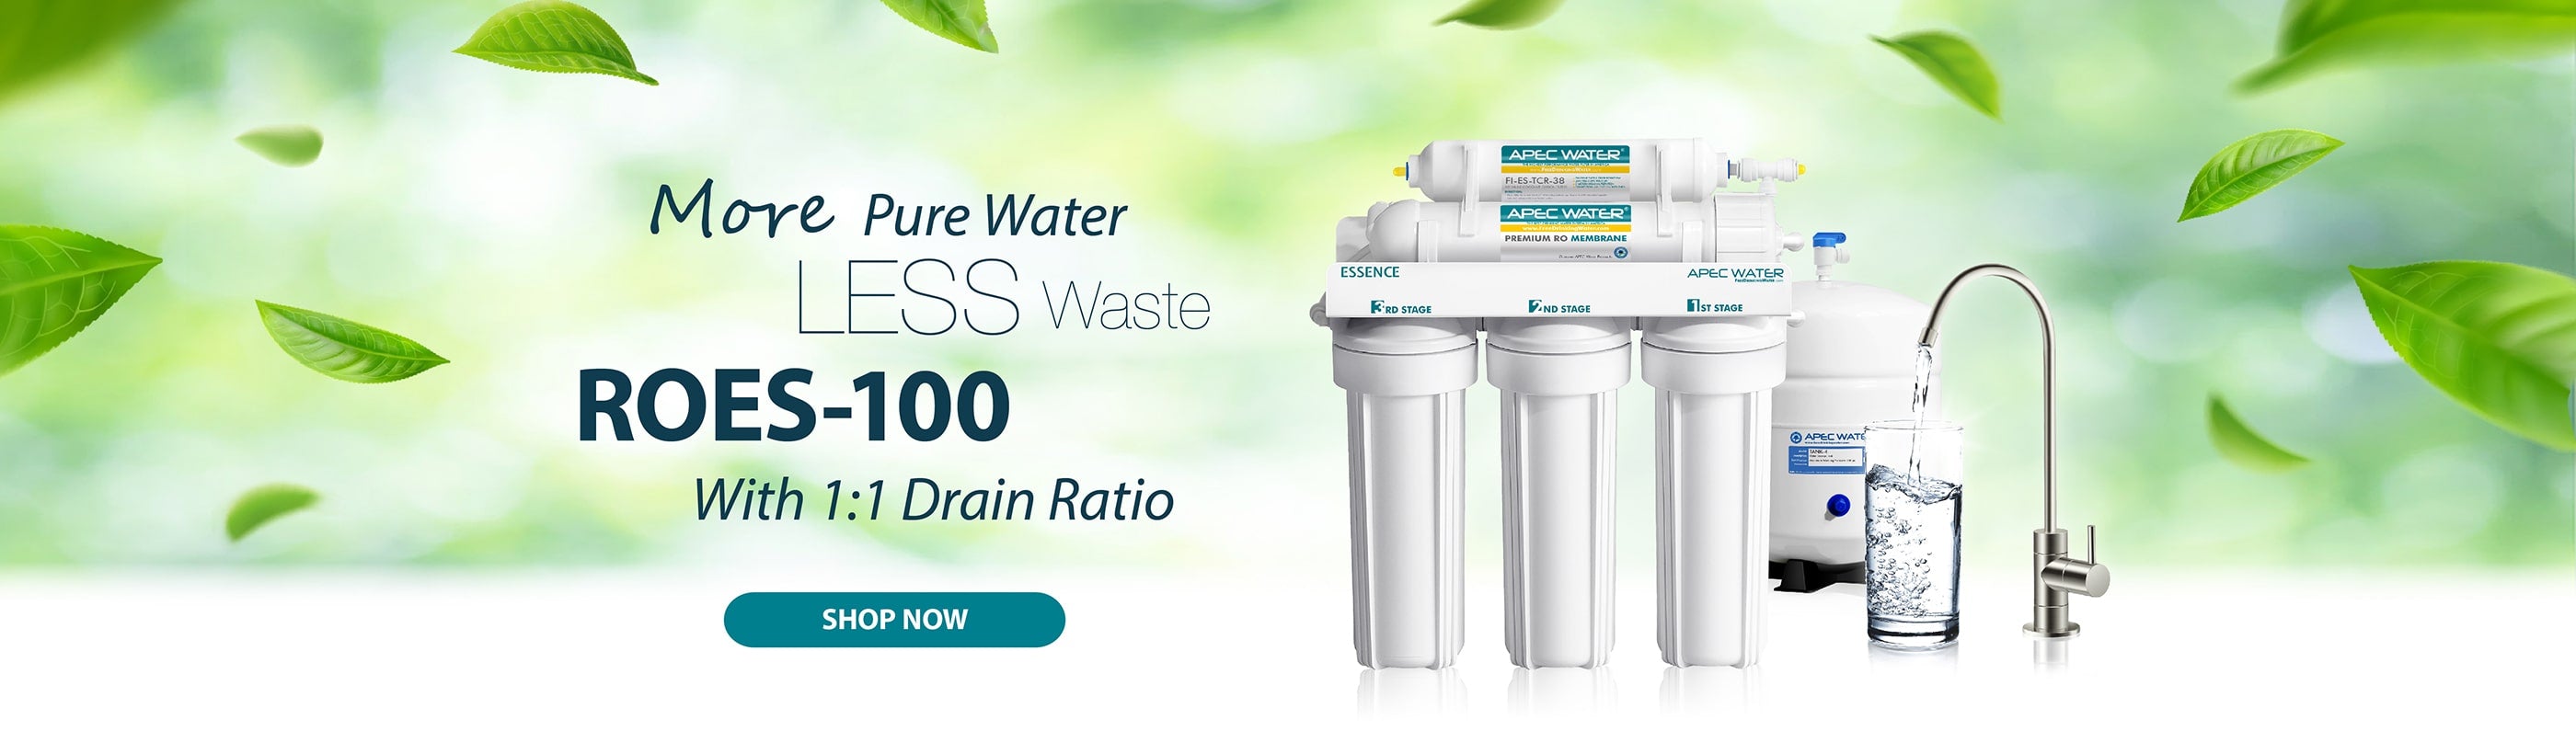 APEC Water new essence ROES-100 ro system homepage banner